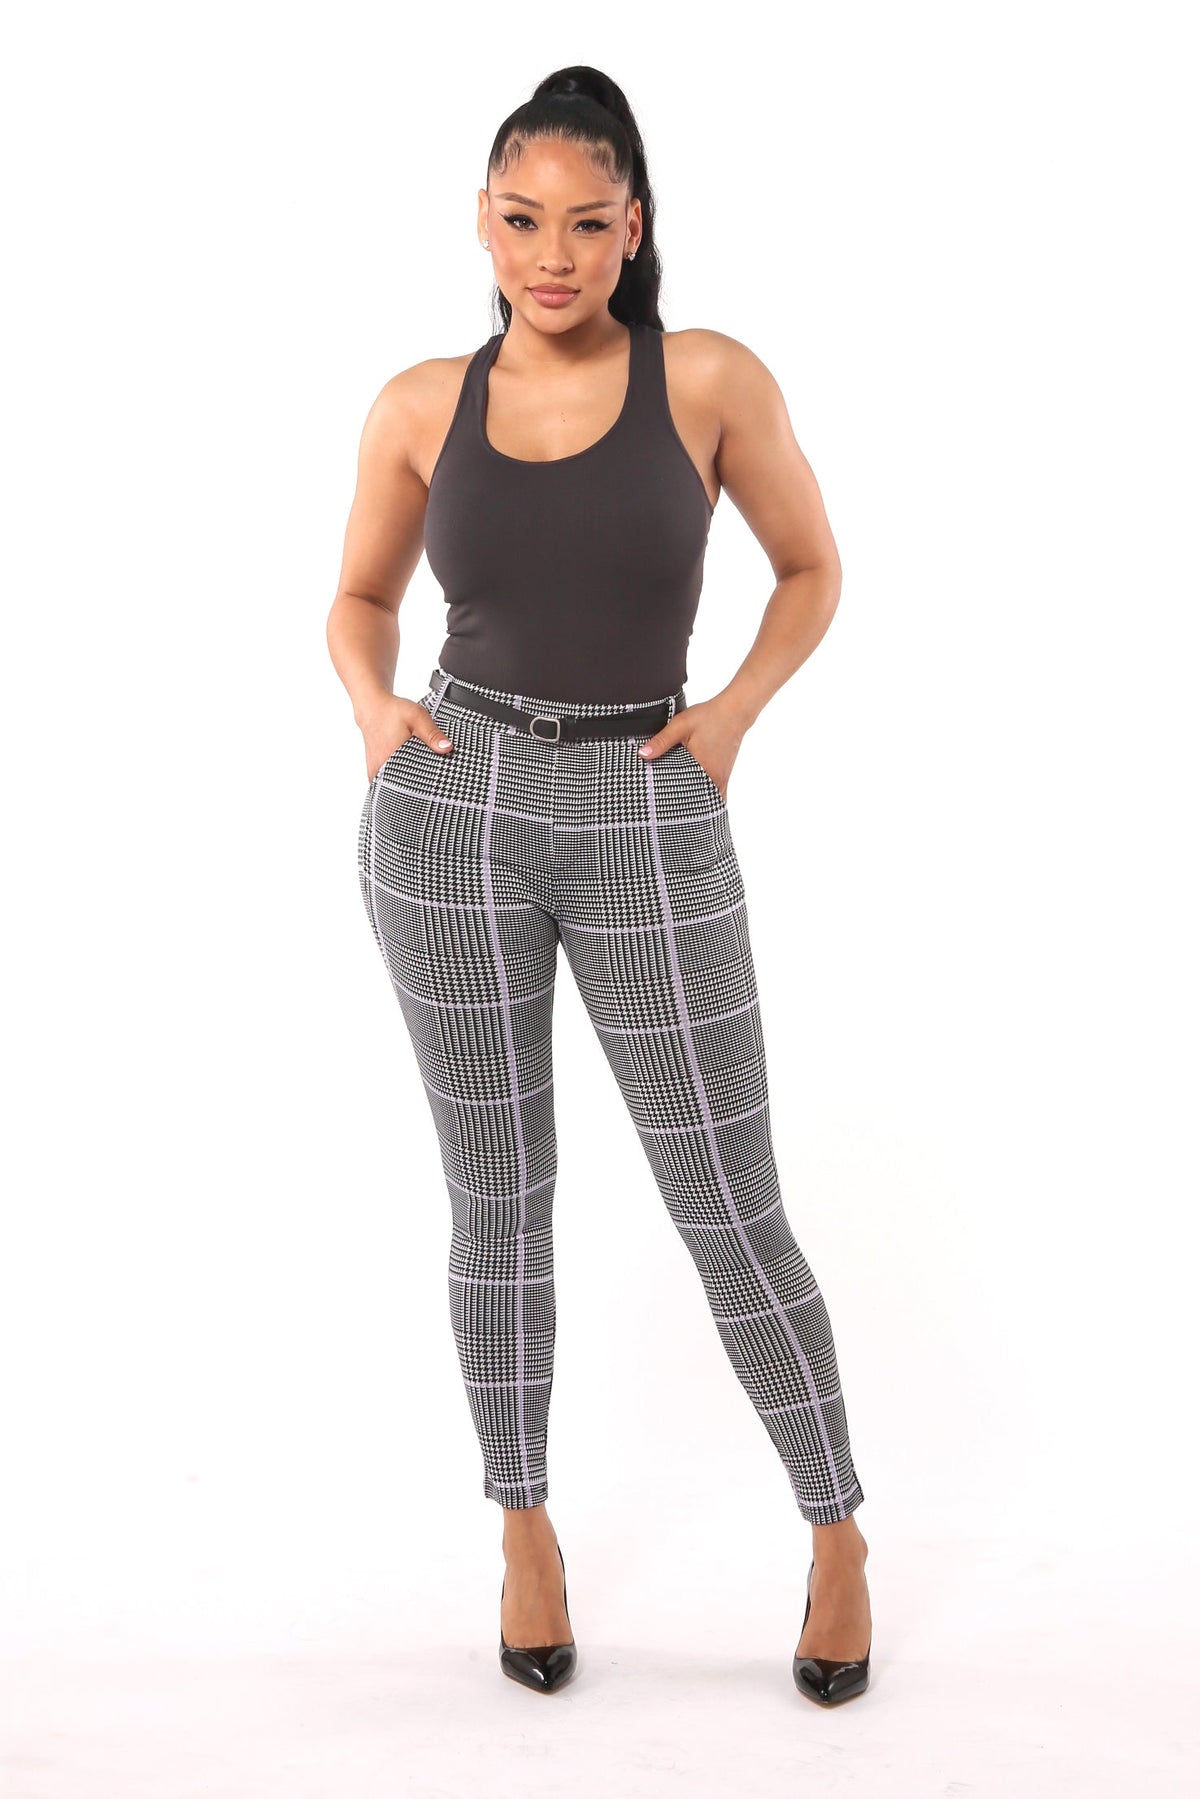 Wholesale Womens Sculpting Treggings With Faux Leather Belt - Black, White, Mauve Plaid Houndstooth - S&G Apparel